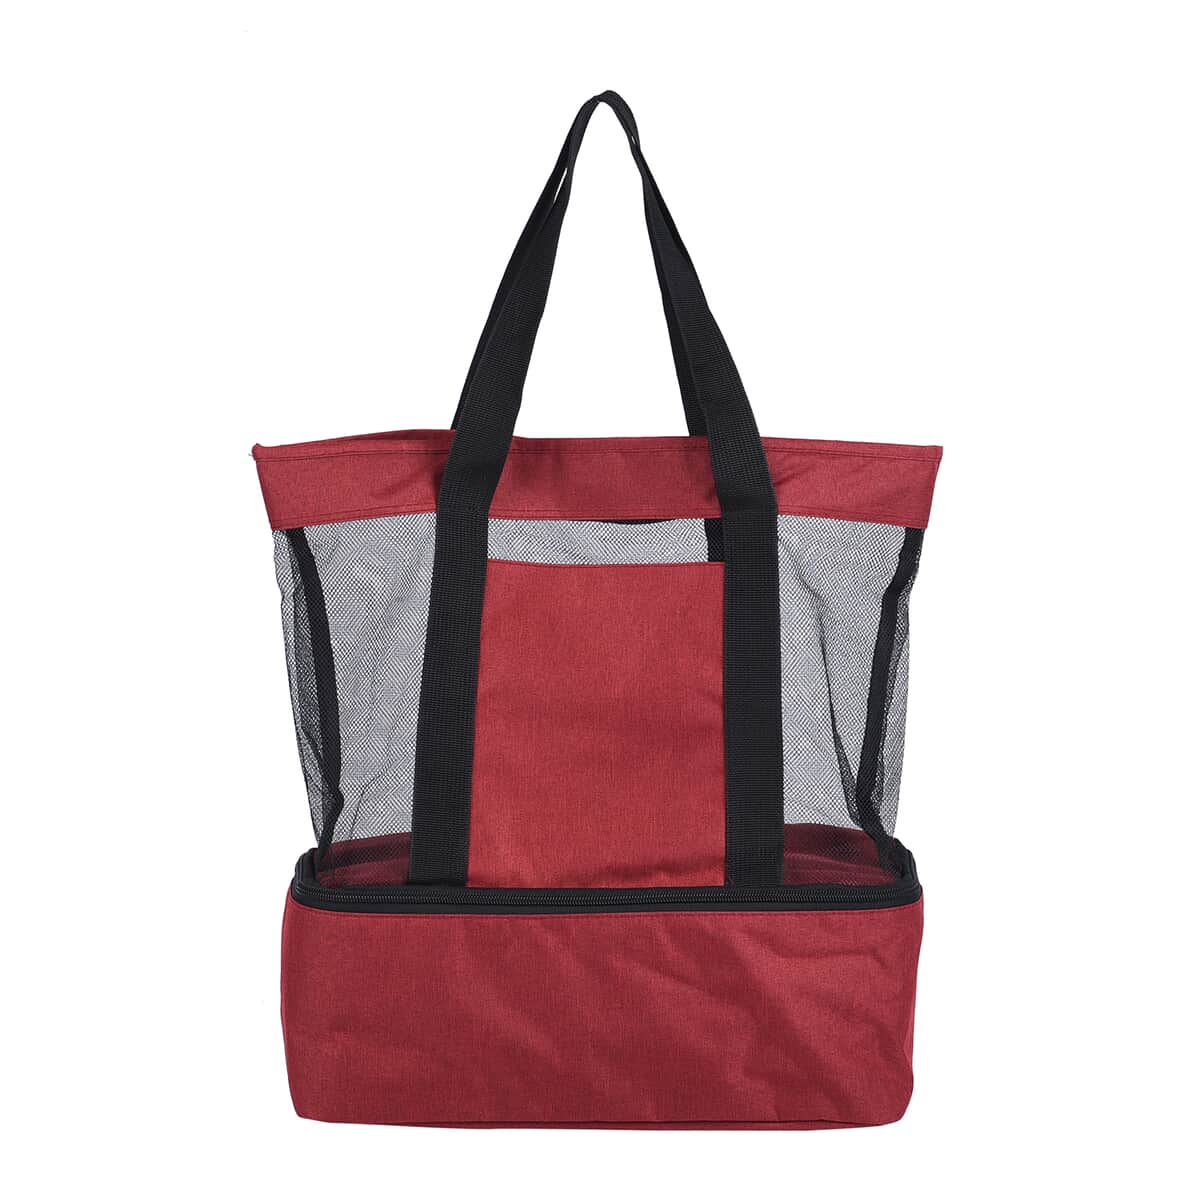 Wine Red Terylene 2 Tier Shopping Bag with Double Handles (14.57"x5.91"x16.54") image number 0